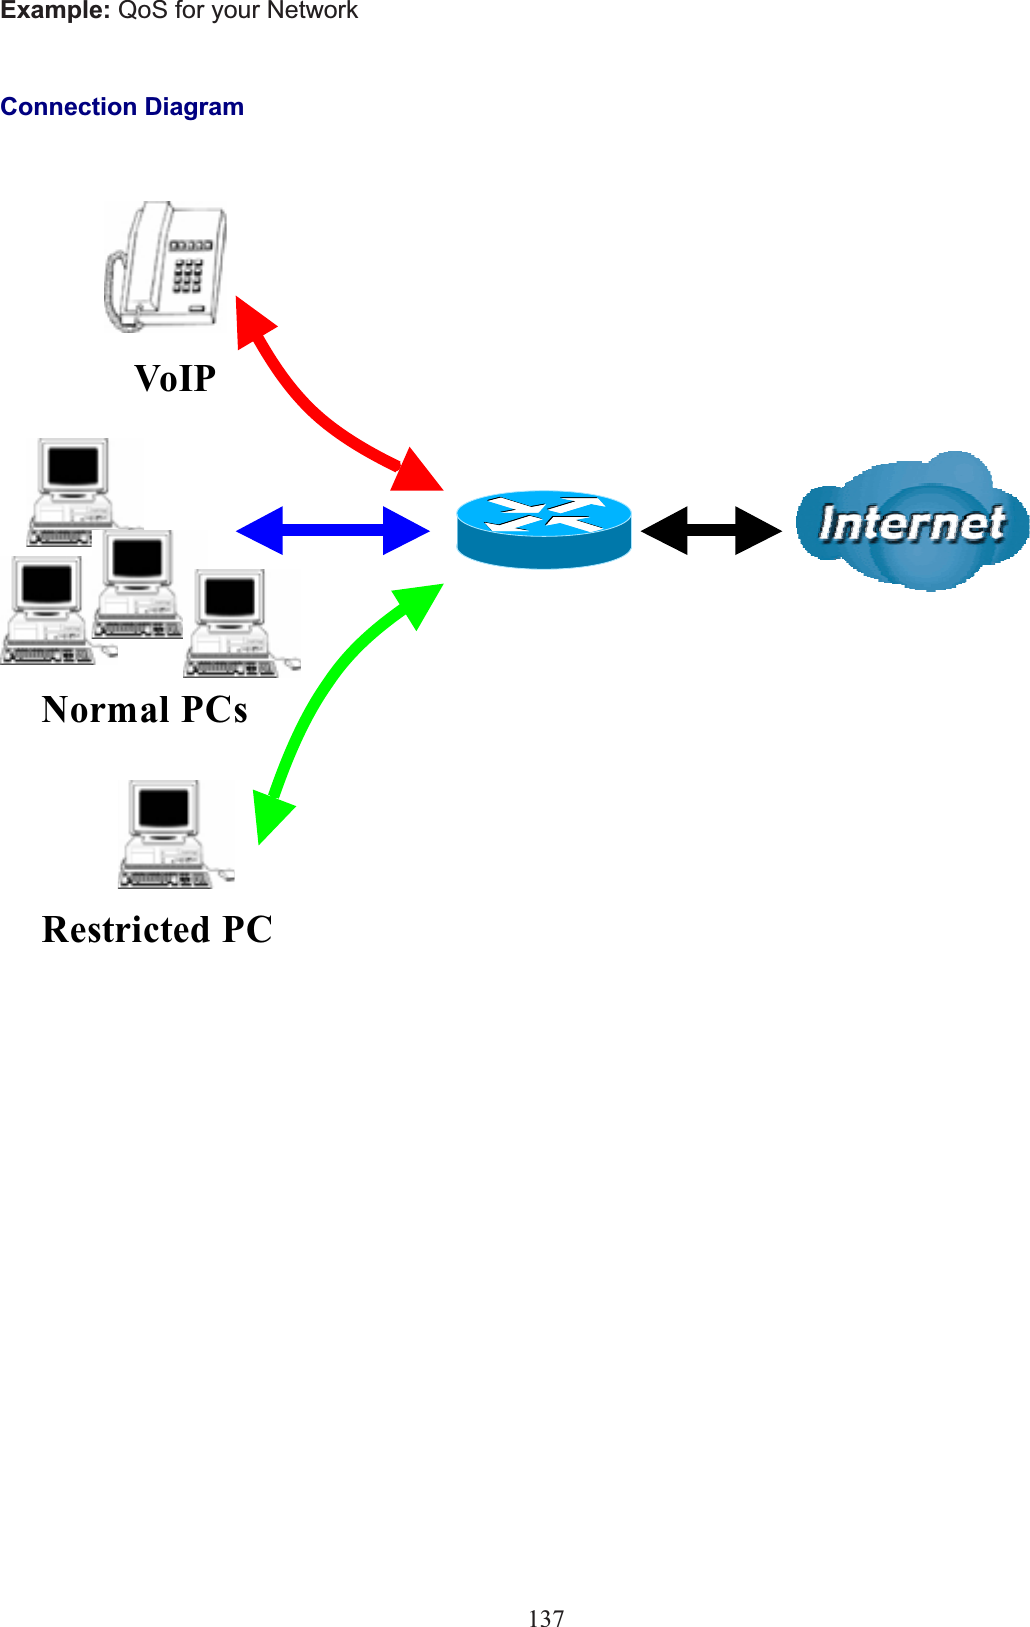 137Example: QoS for your NetworkConnection DiagramRestricted PCNormal PCsVoIP